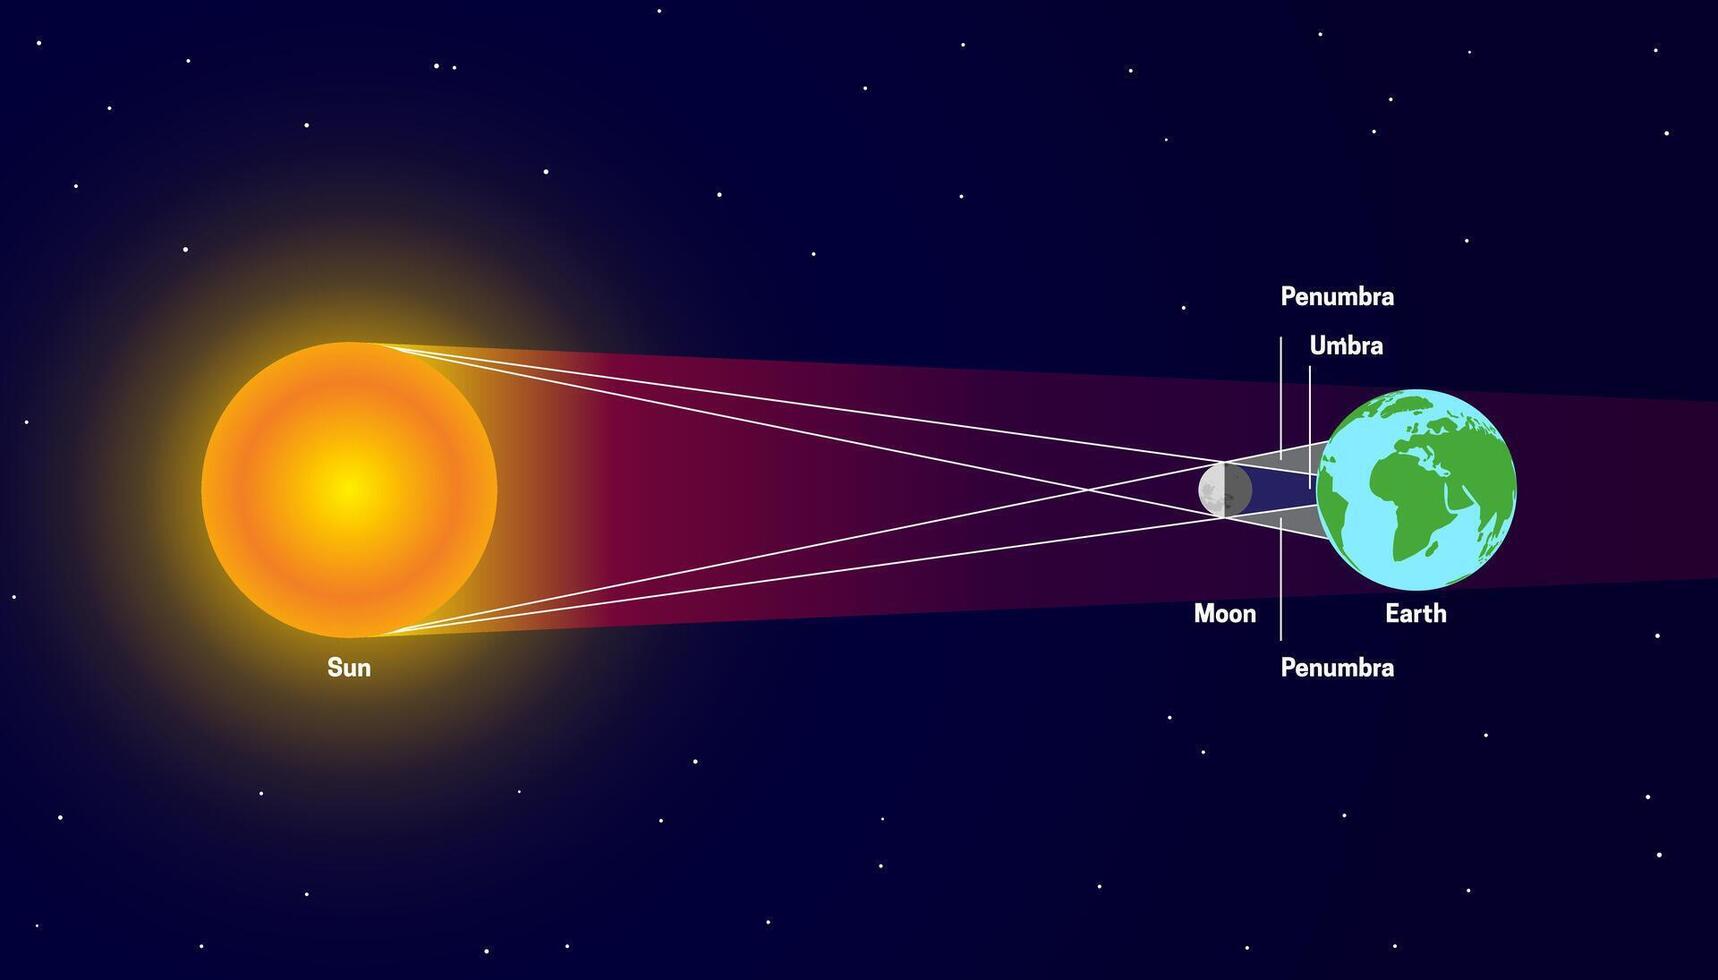 Solar Eclipse with Penumbra and Umbra. Sun, Moon, Earth Illustration vector